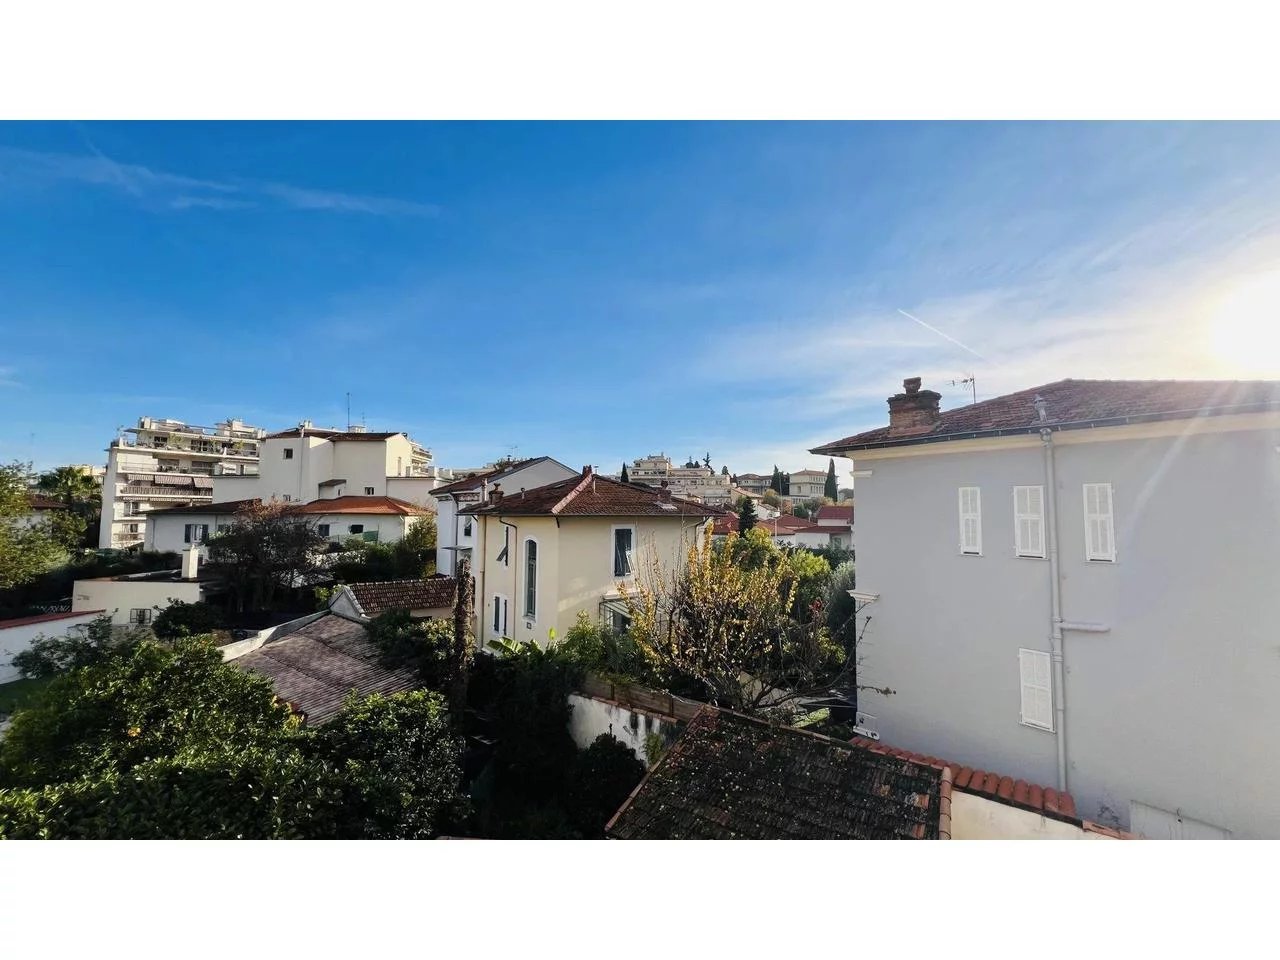 Appartement  3 Rooms 54m2  for sale   169 000 €